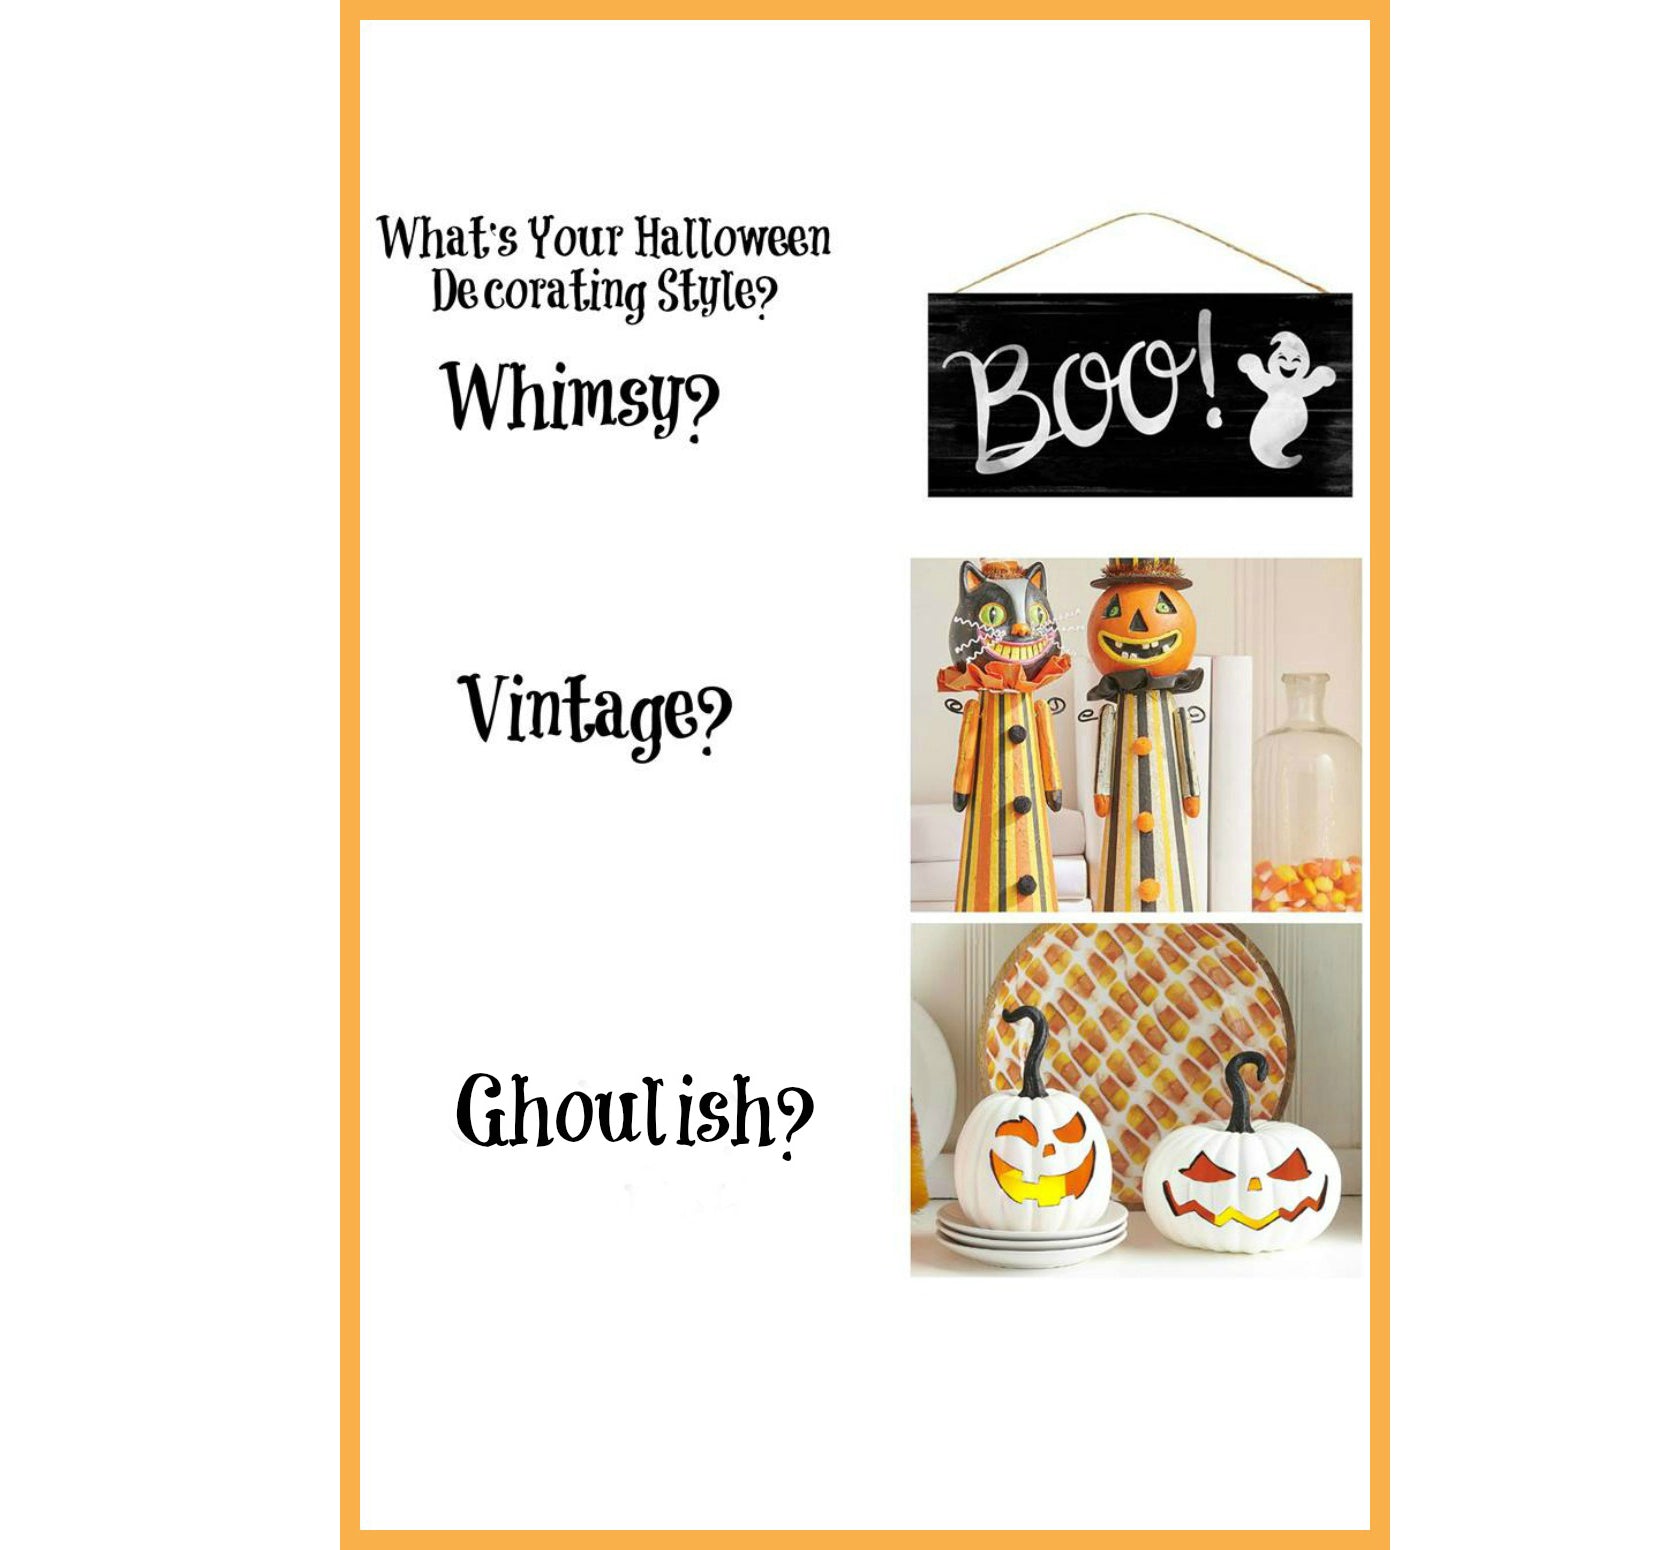 What's Your Halloween Style - Whimsy? Vintage? Ghoulish?